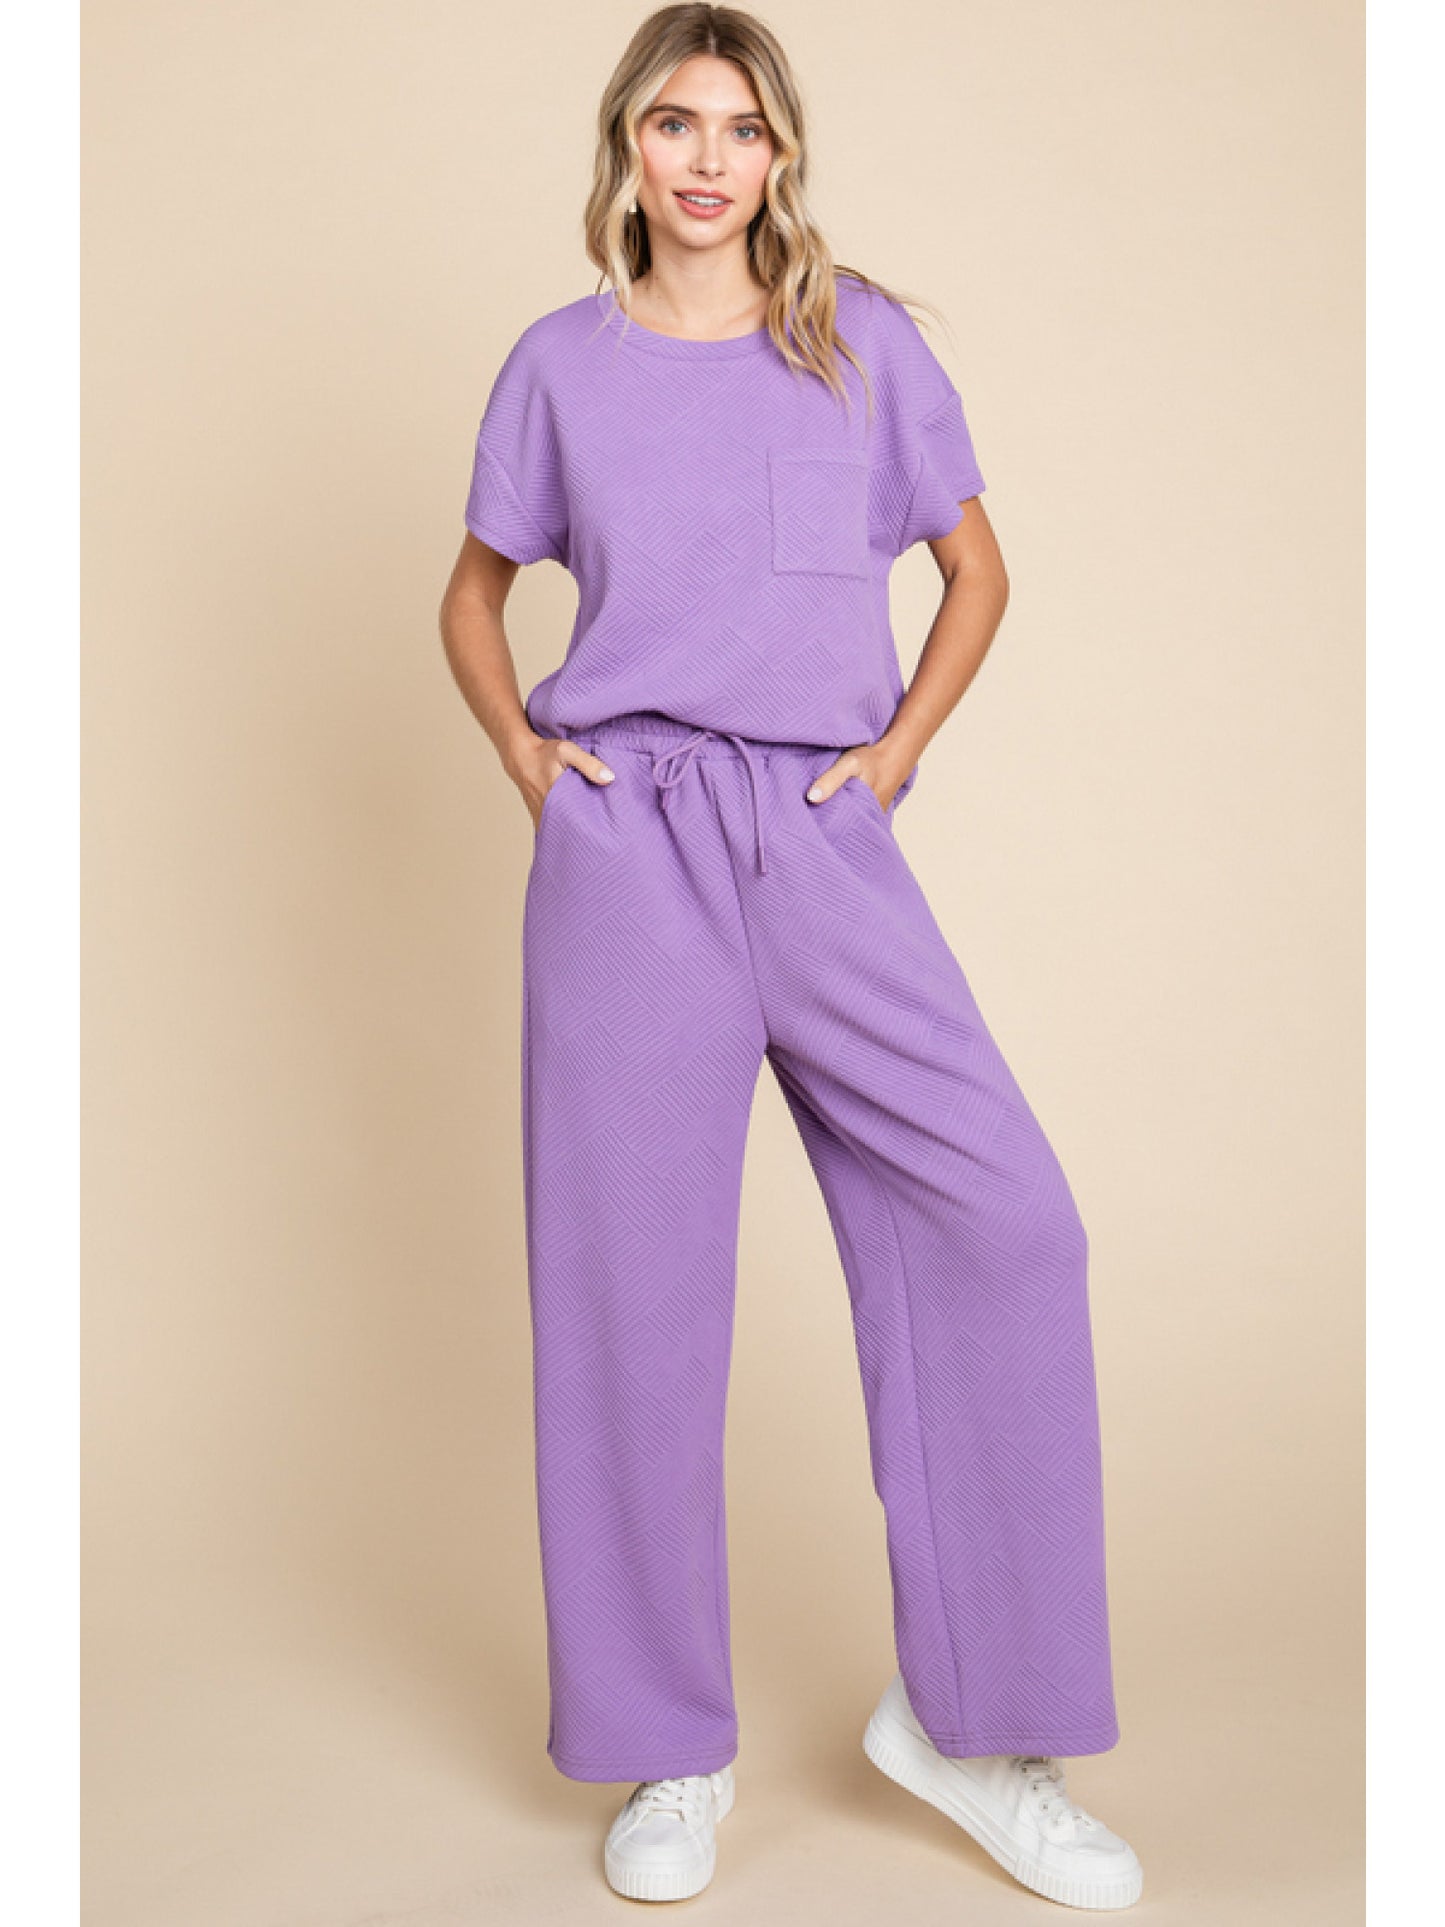 Lavender textured Top and Bottoms set